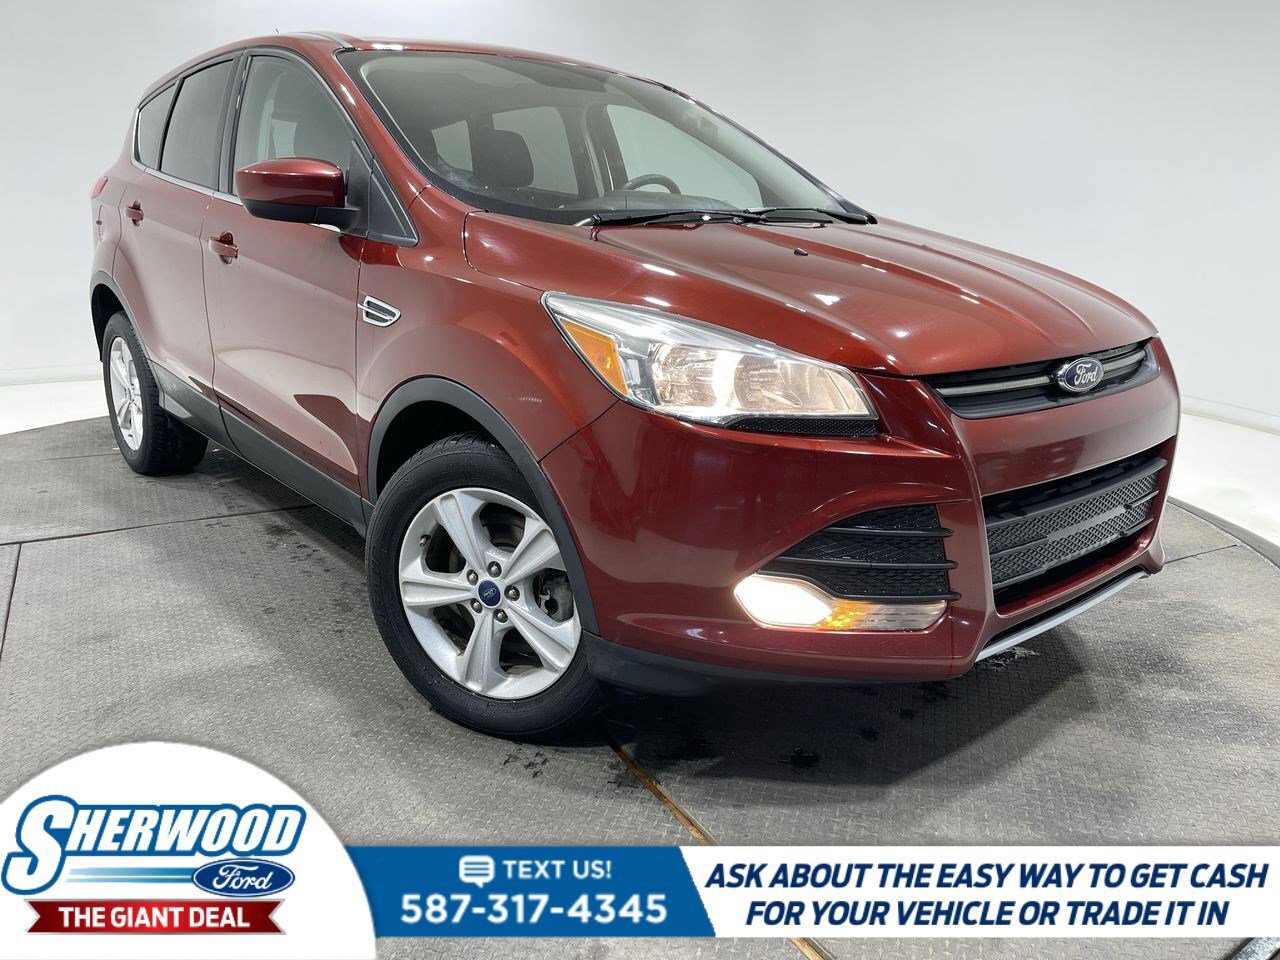 2014 Ford Escape SE AWD-$0 Down $150 Weekly CLEAN CARFAX LOW KM